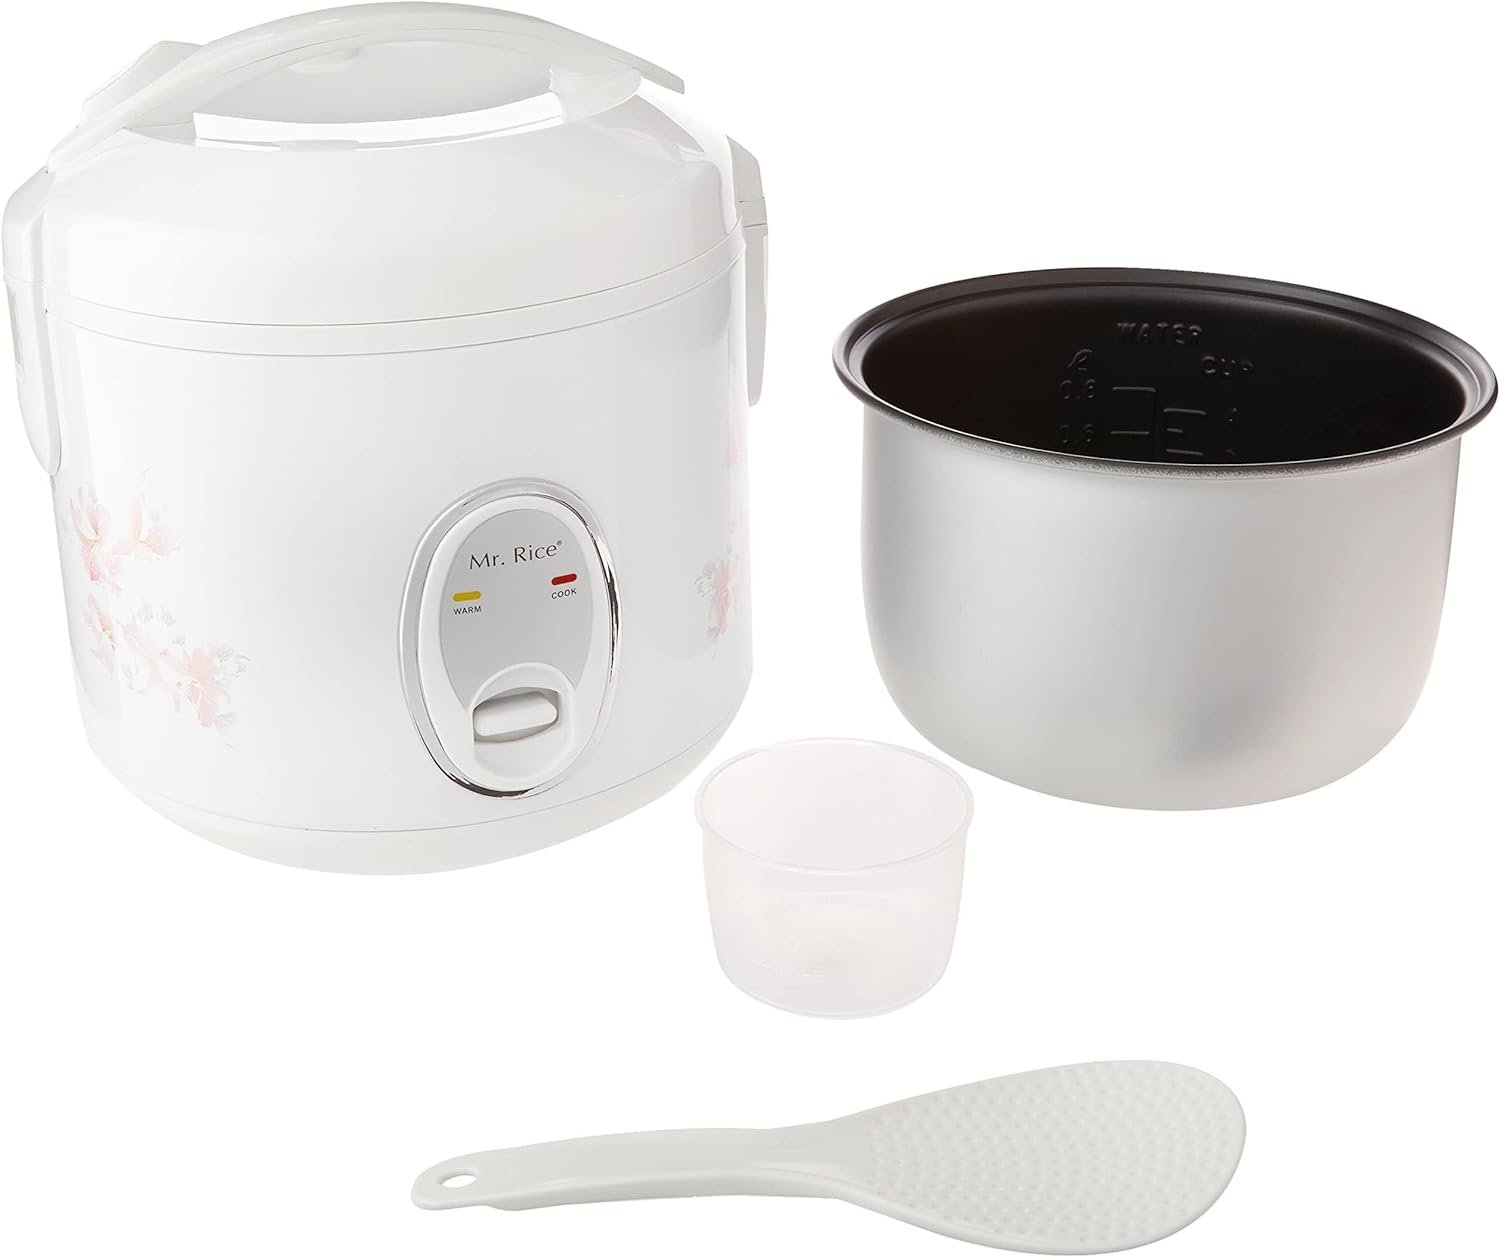 Effortless Cooking with the 4 Cups Rice Cooker